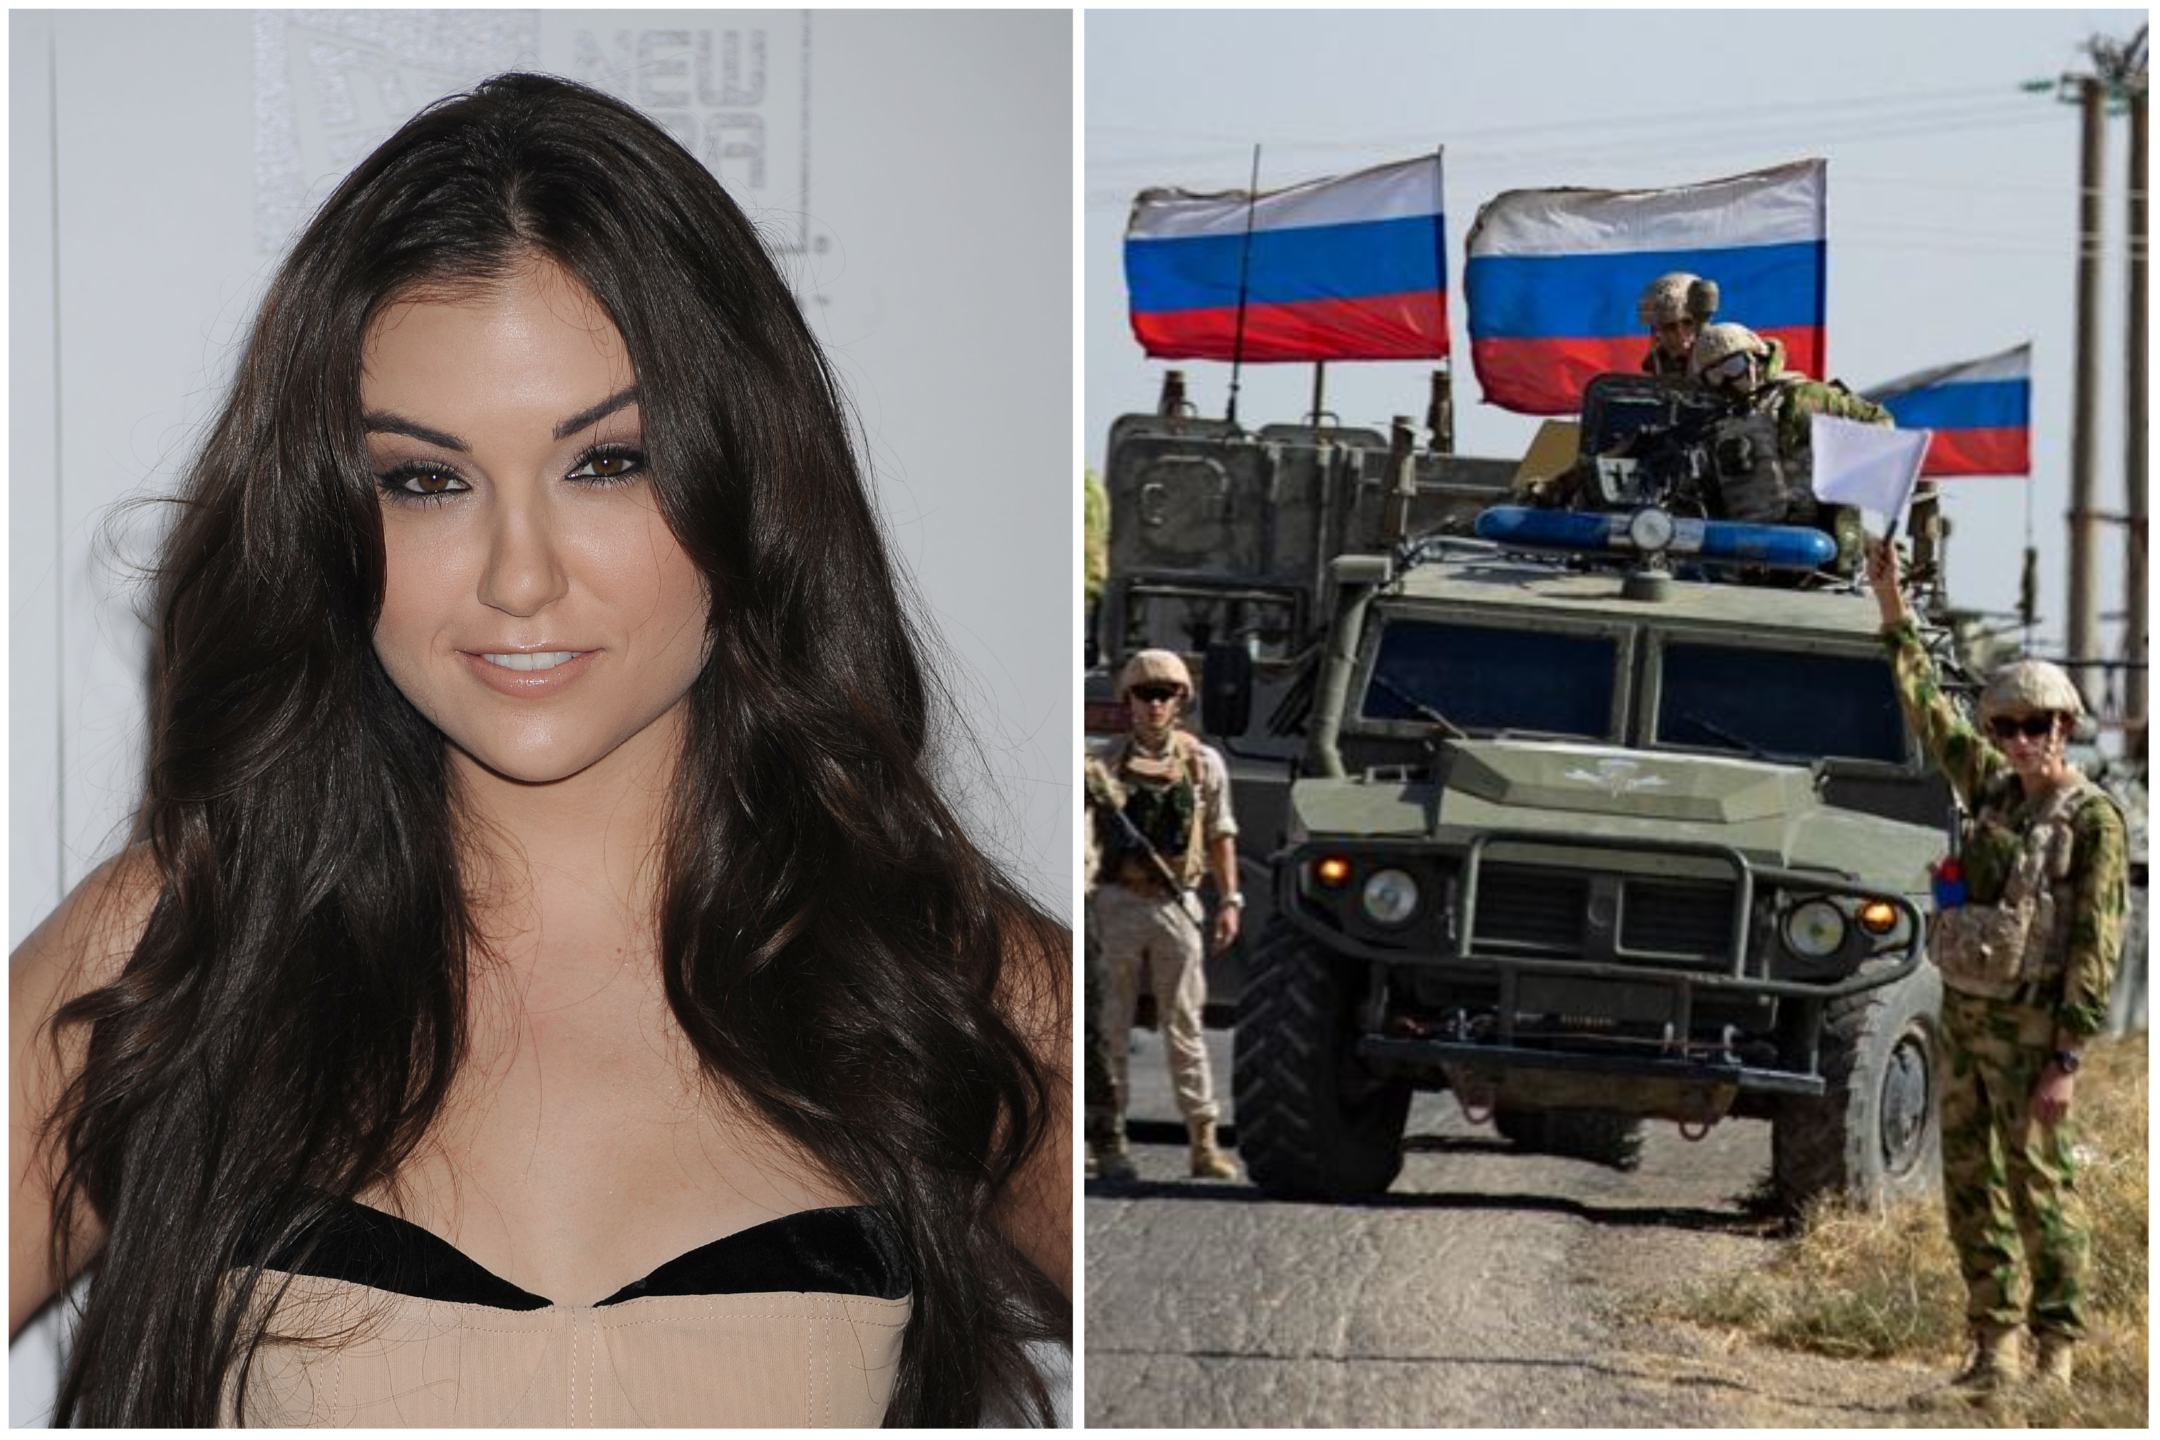 Fact Check Was Ex-Adult Film Star Sasha Grey in Russian Military Promo?